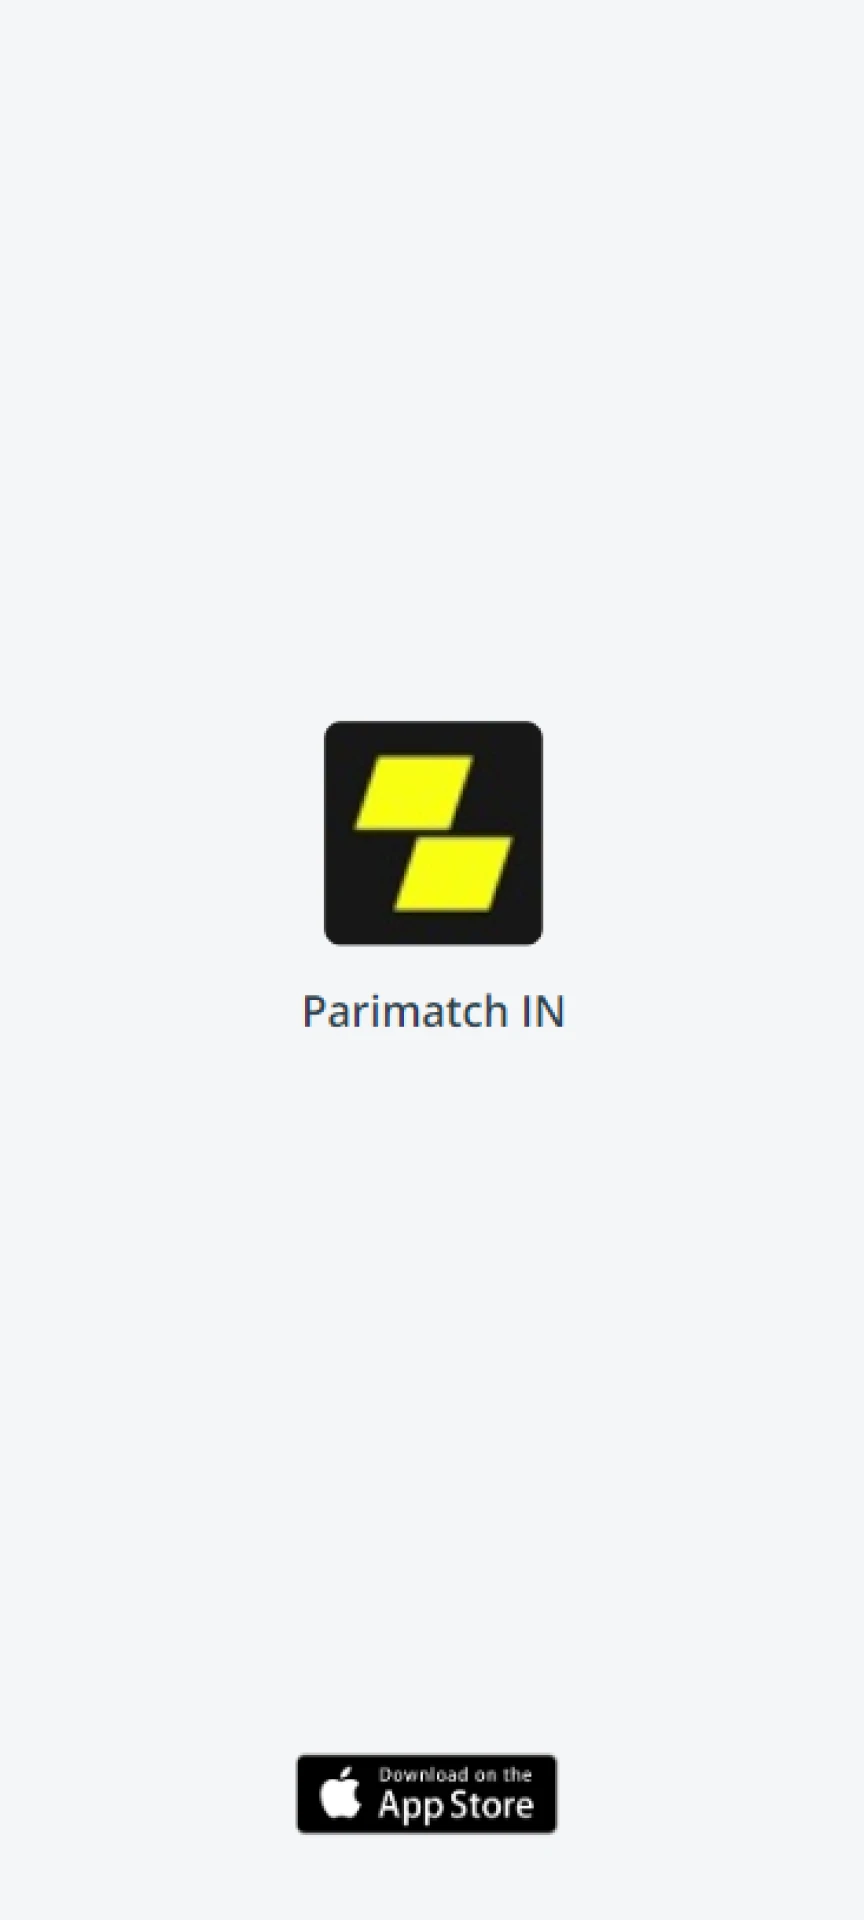 Confirm the download of the Parimatch app on your iOS device.